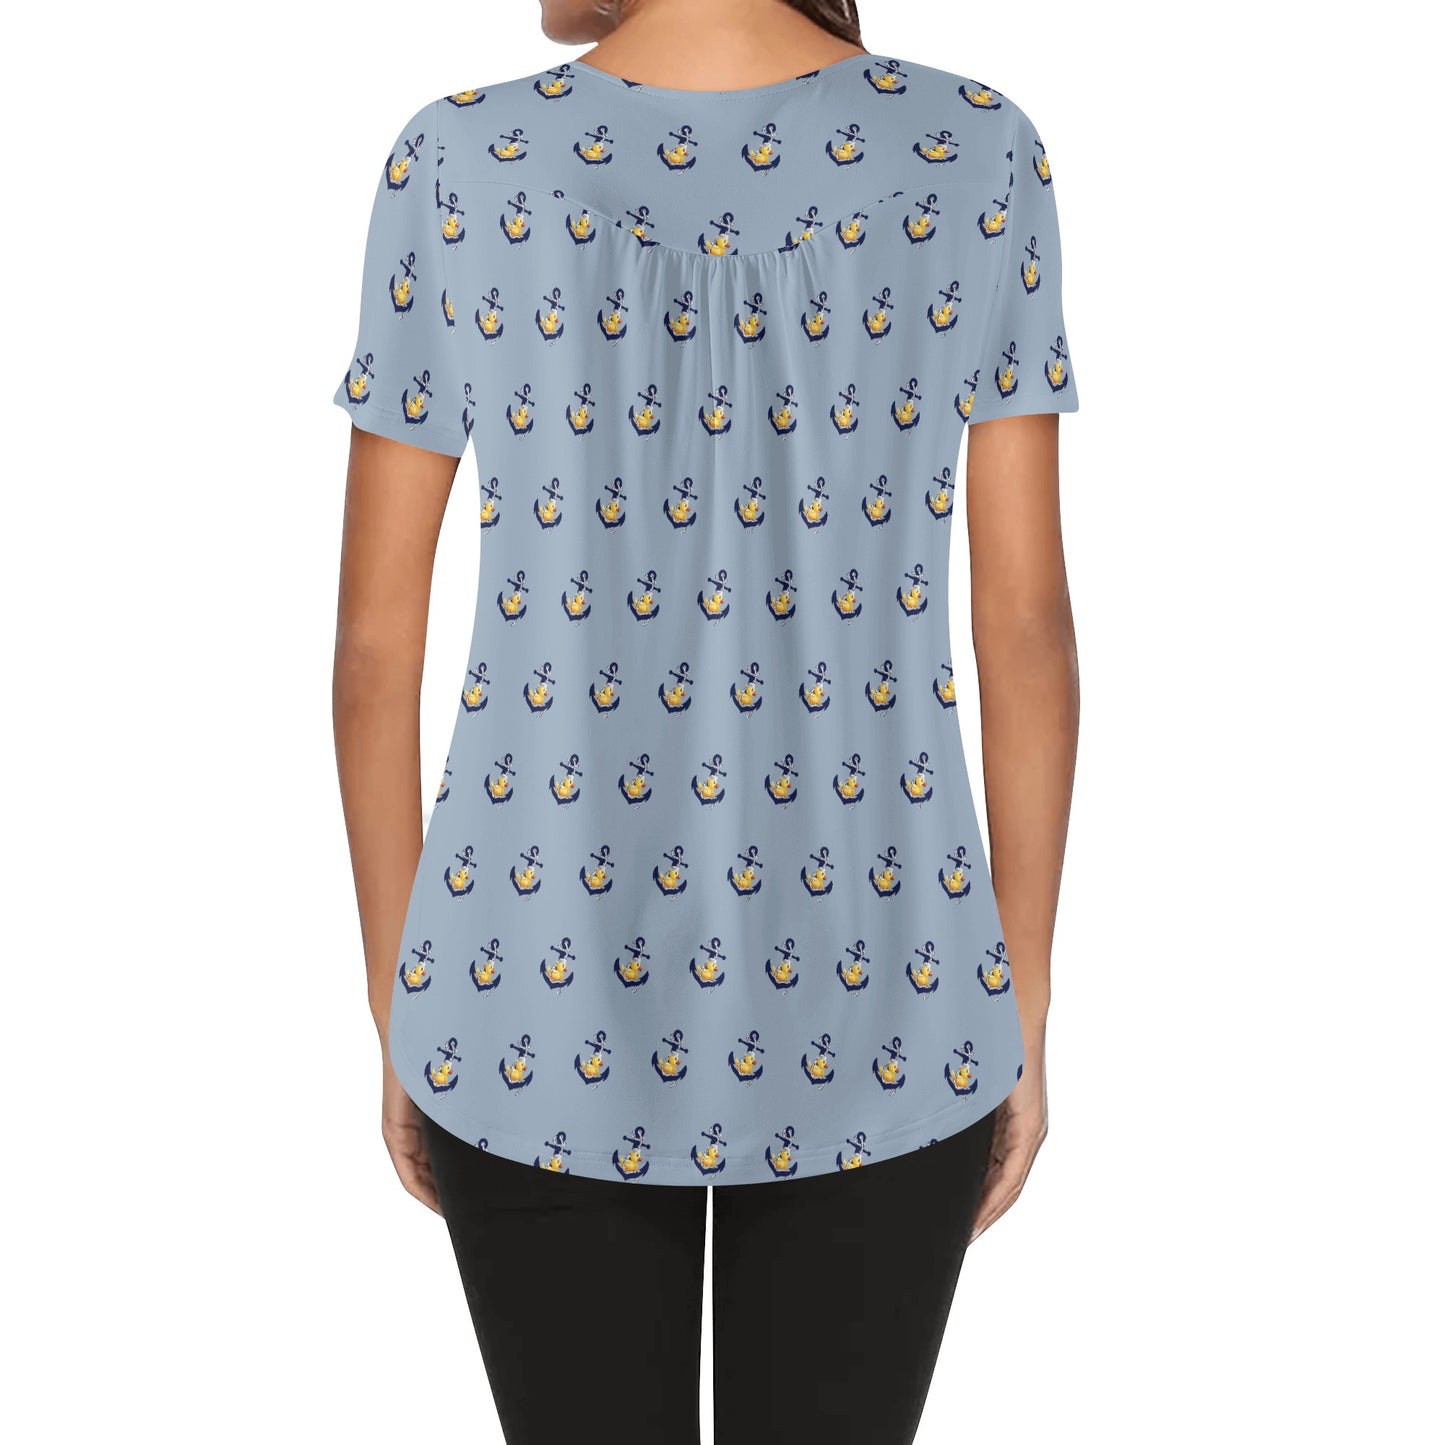 Ahoy Ducky Womens Scoop Neck Short Sleeved Blouse